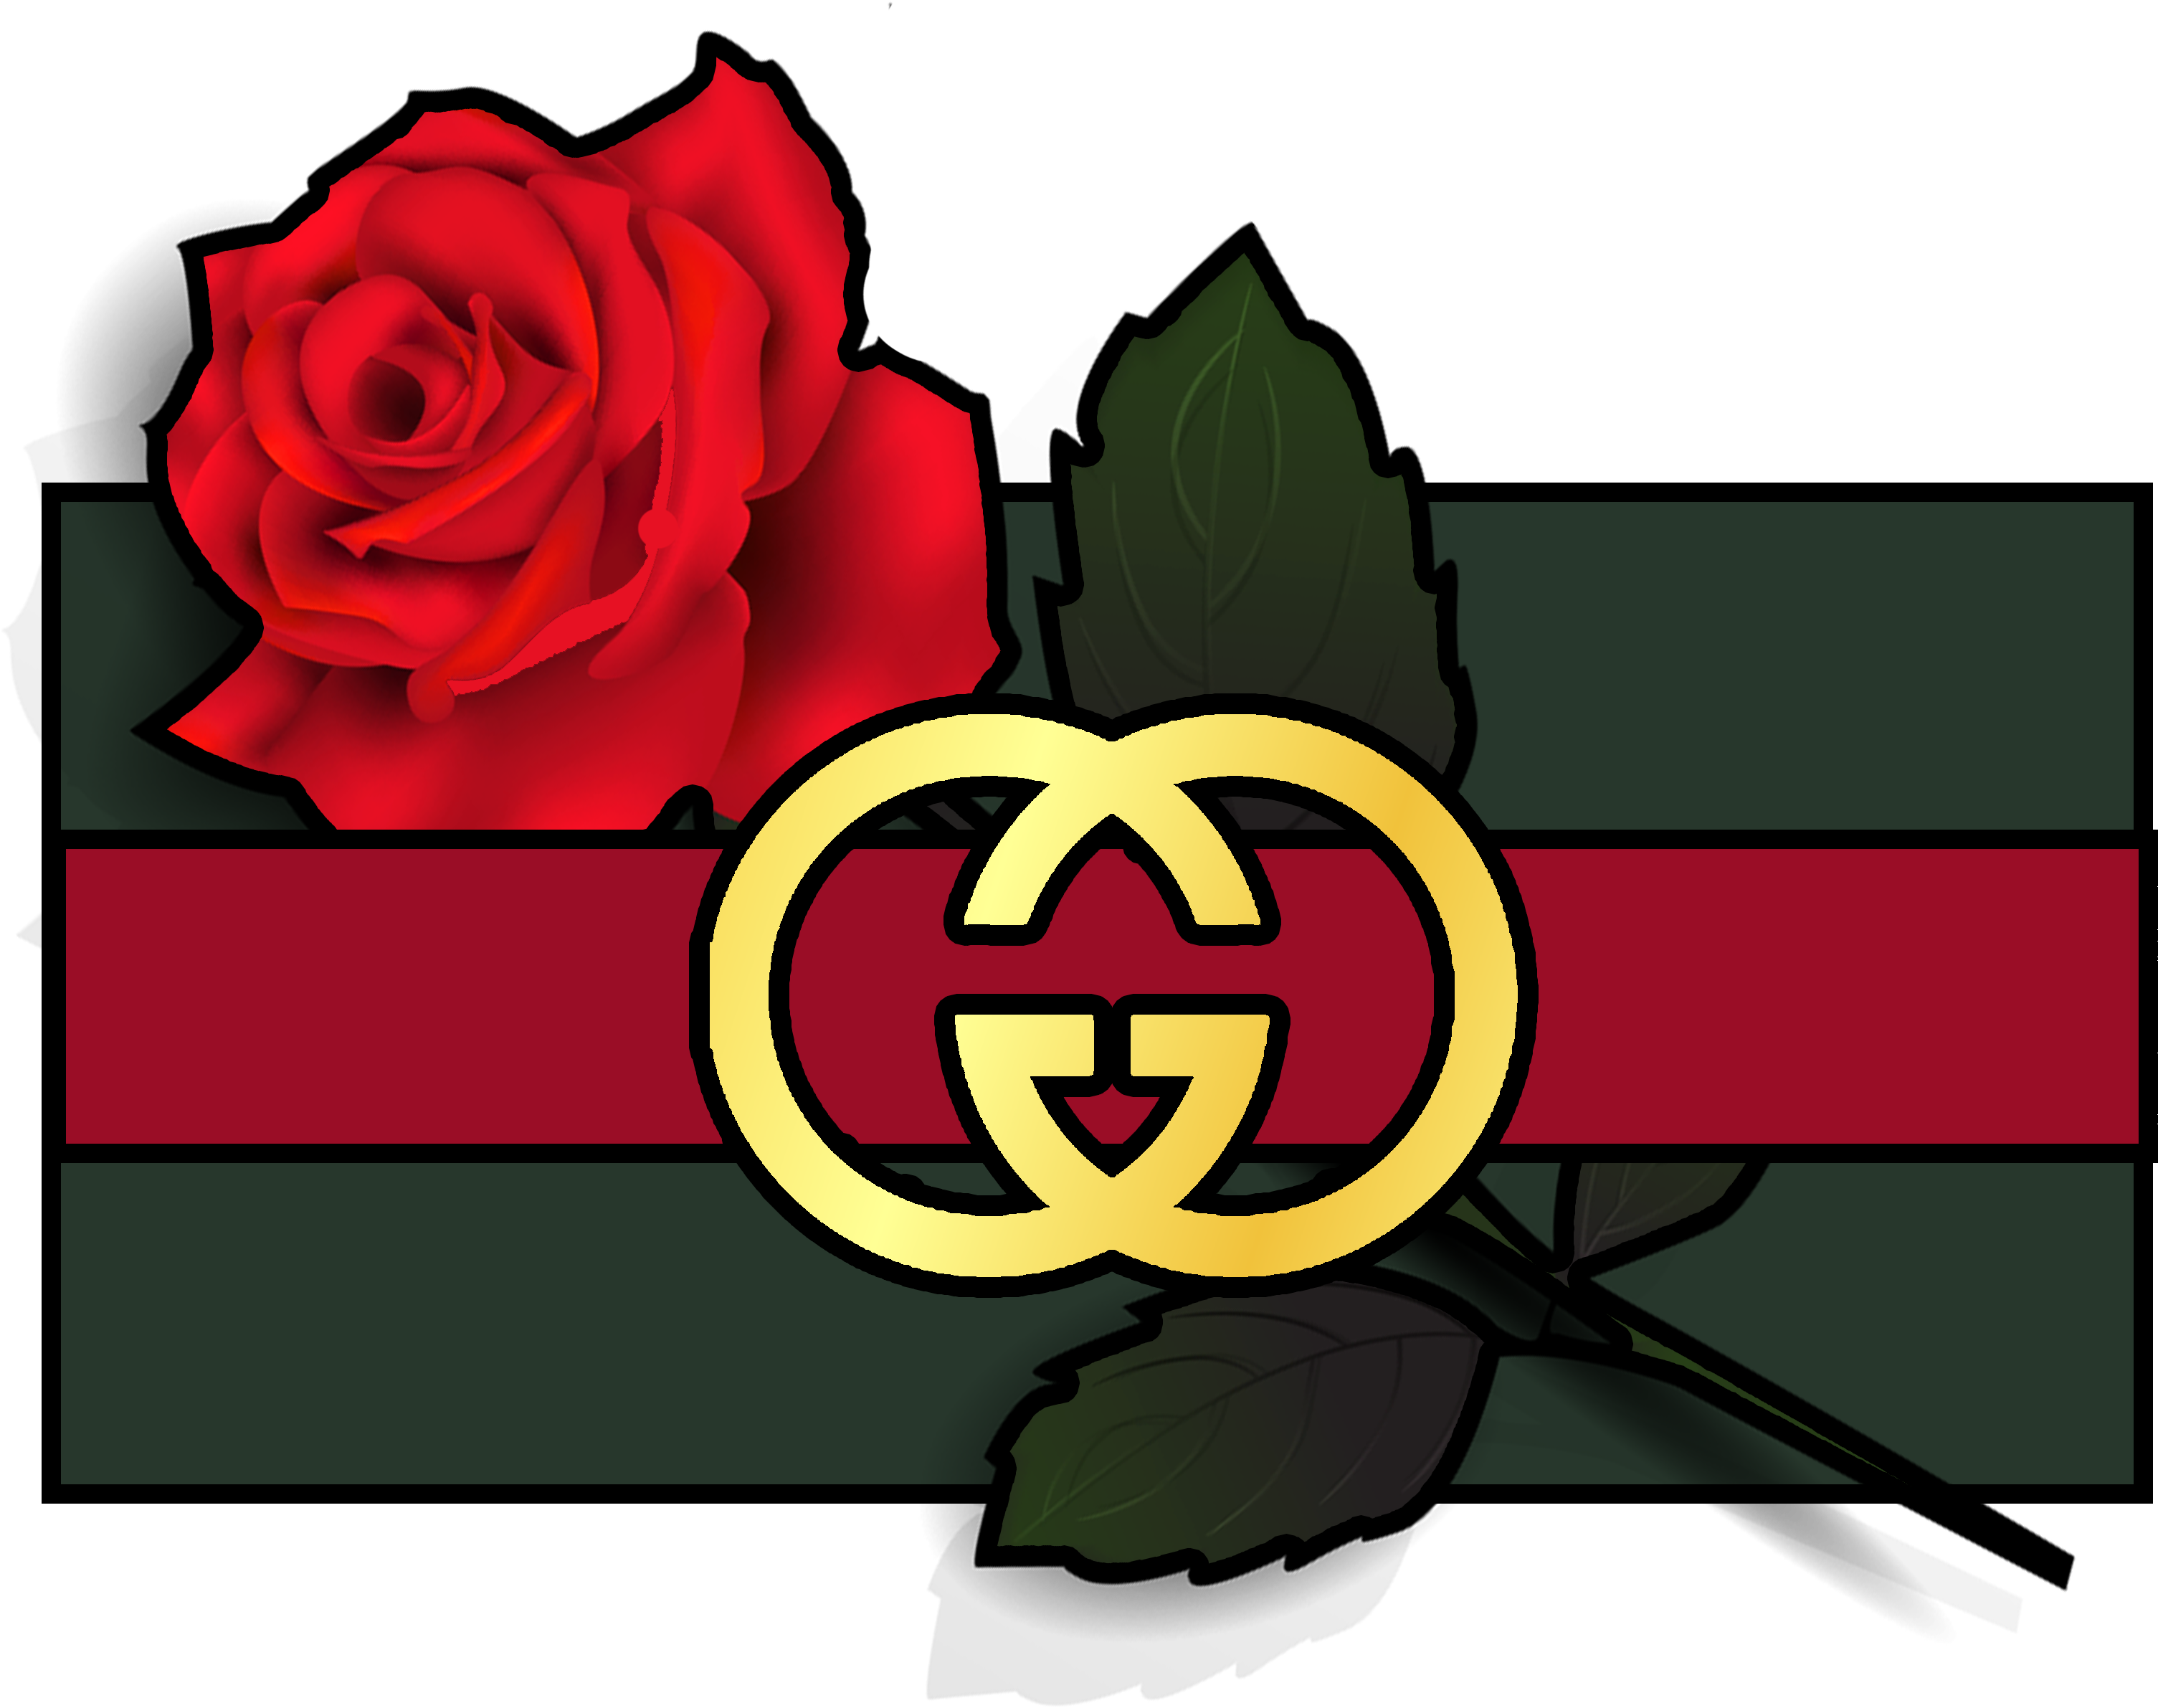 Gucci Free HQ Image PNG Image